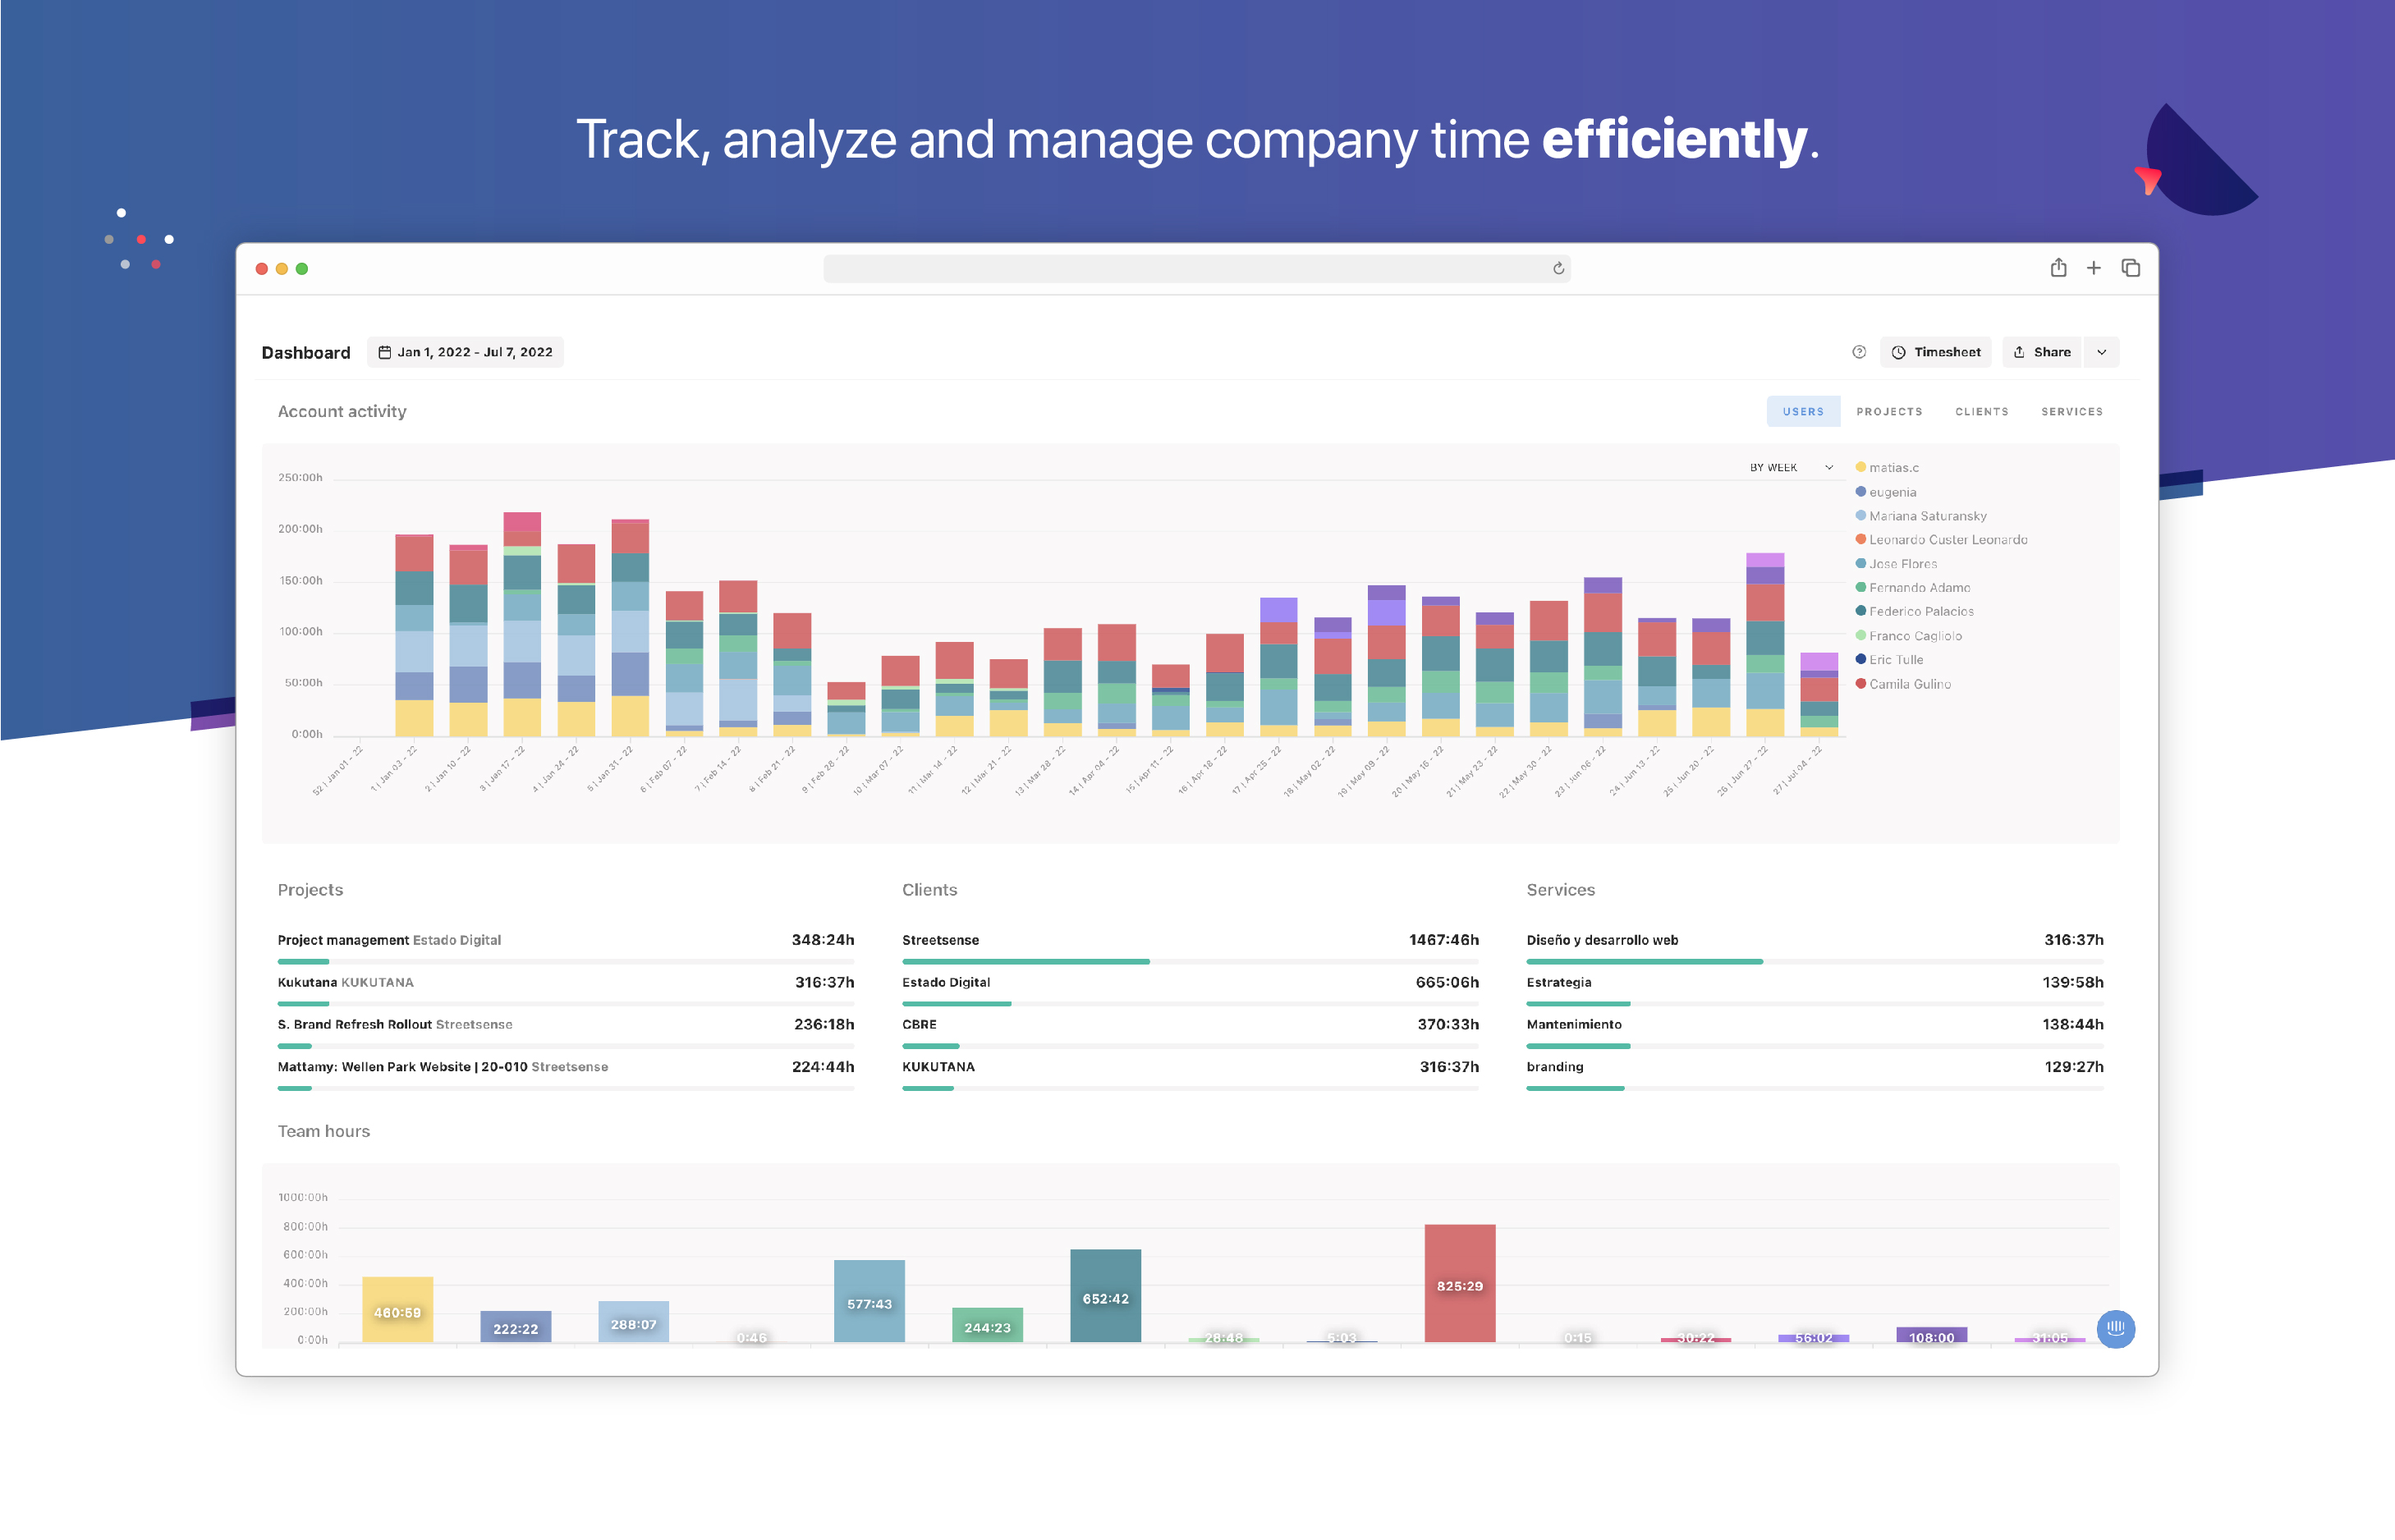 Track, analyze and manage company time efficiently.